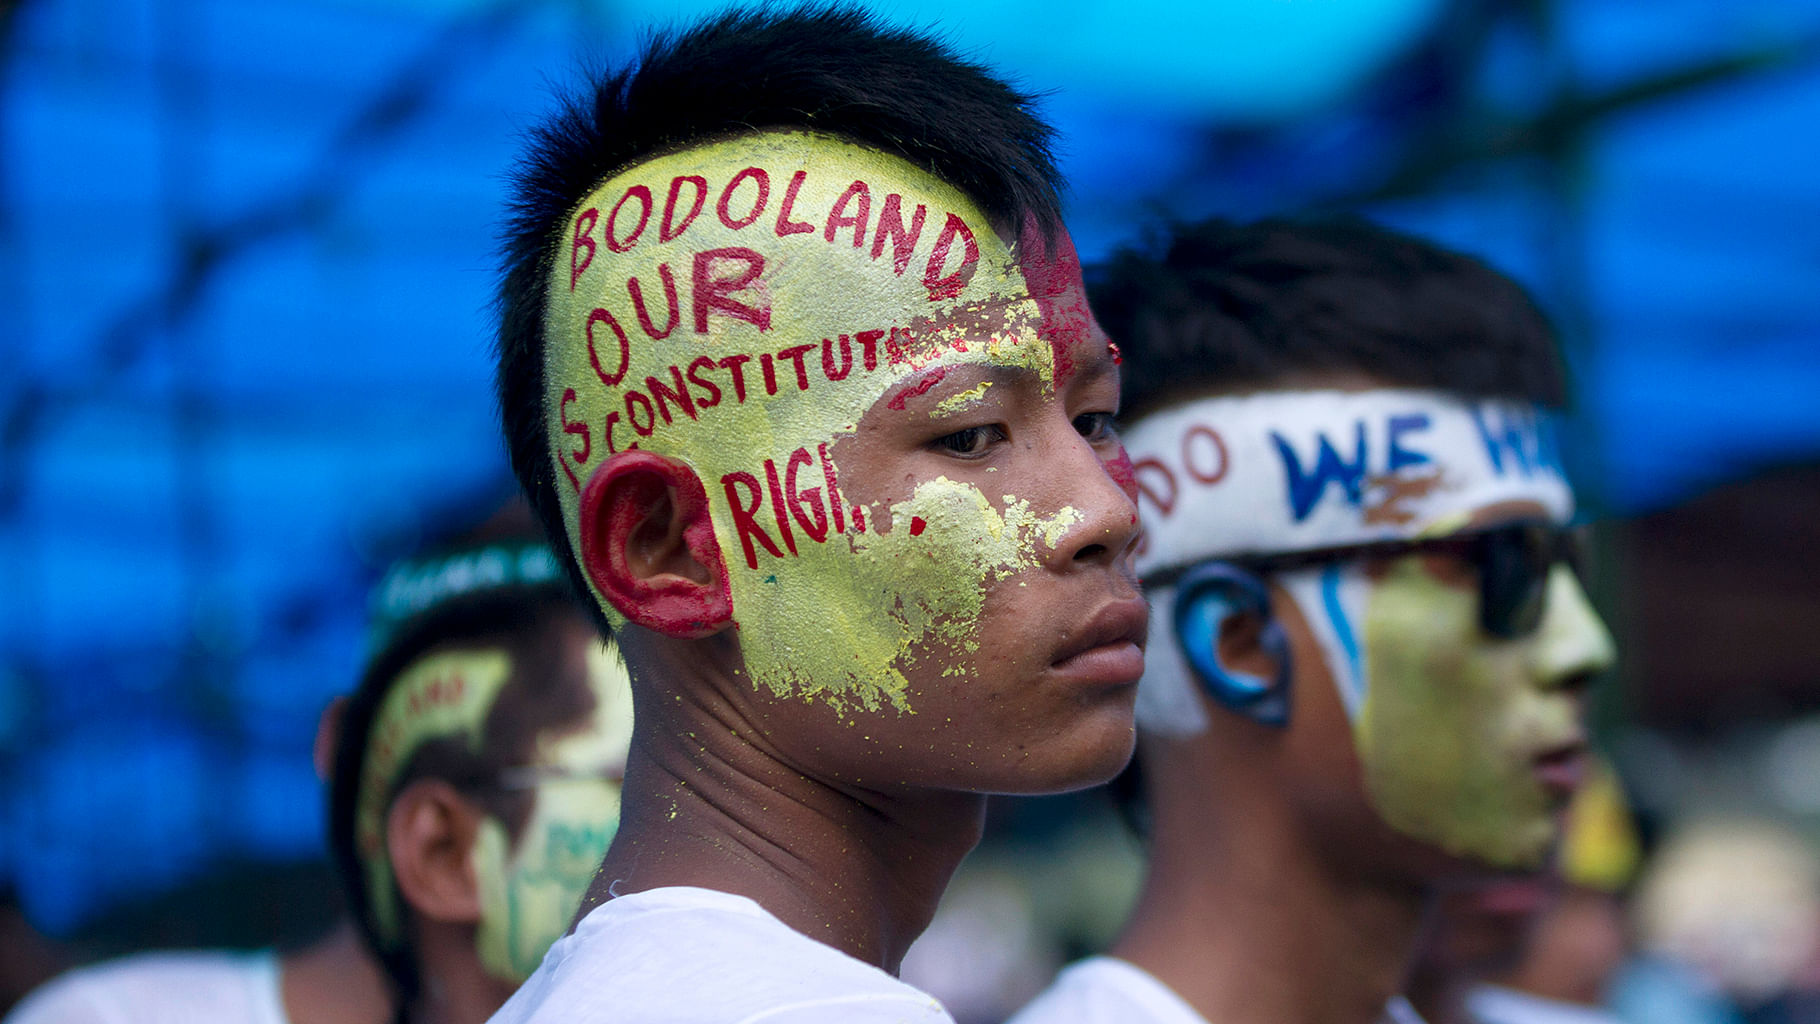 Supporters of Bodoland People’s Front (BPF), a local political party, with their faces painted, attend a rally at Kokrajhar in the northeastern Indian state of Assam on August 4, 2013. (Photo: Reuters)